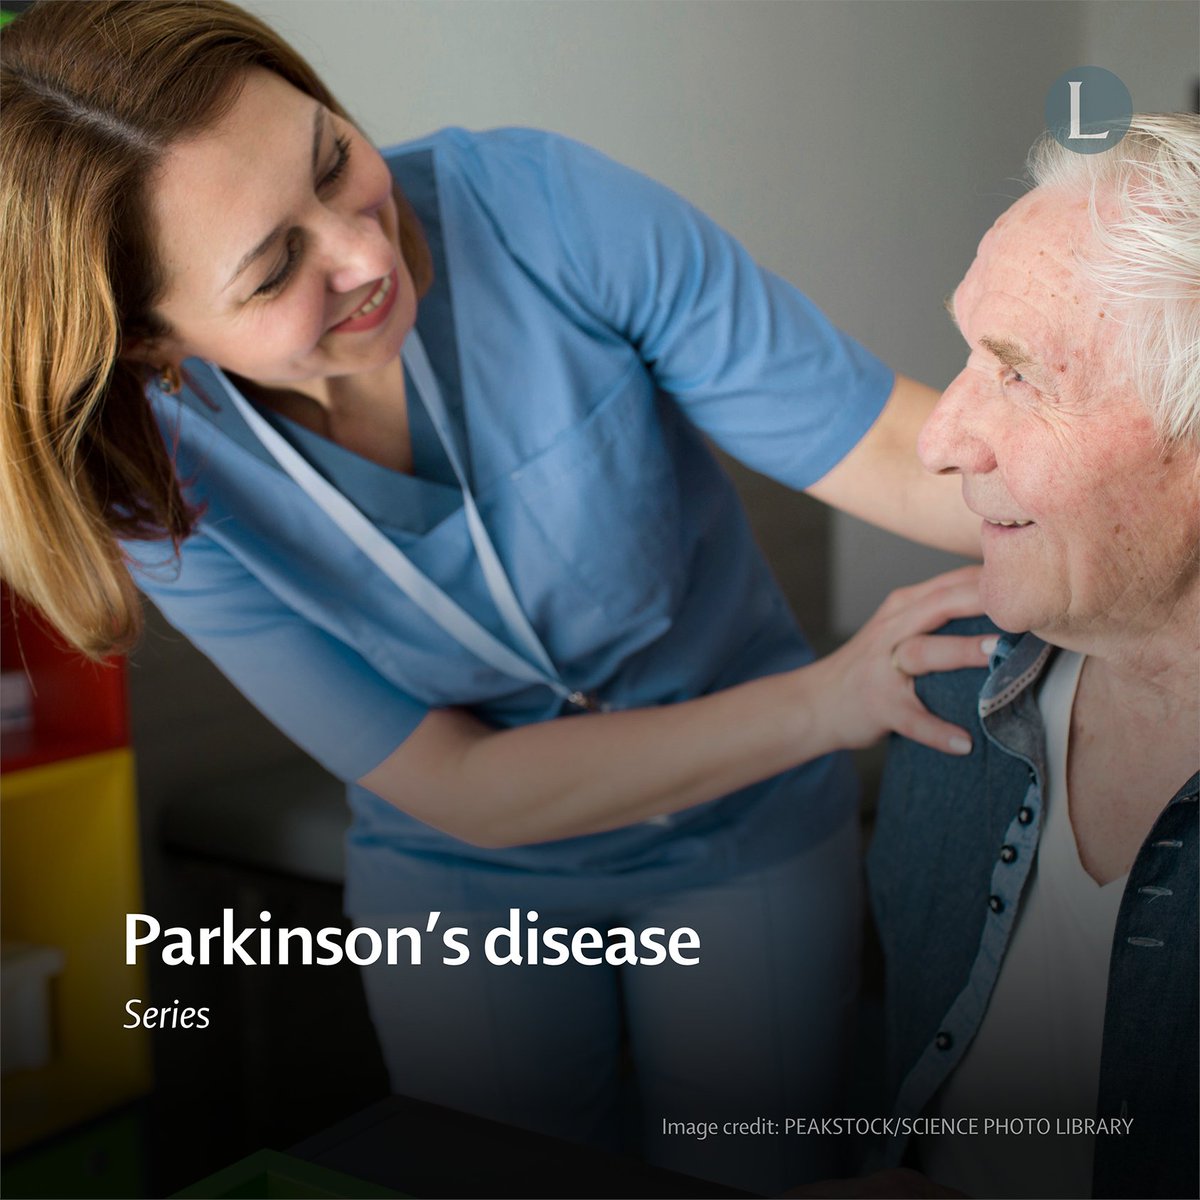 Parkinson’s disease (PD) is the 2nd most common neurodegenerative disease. In a new Series, authors address the current state of knowledge on epidemiology, recent advances in pathogenesis, & the latest evidence supporting treatment of the disease. 🔗 hubs.li/Q02gBl960